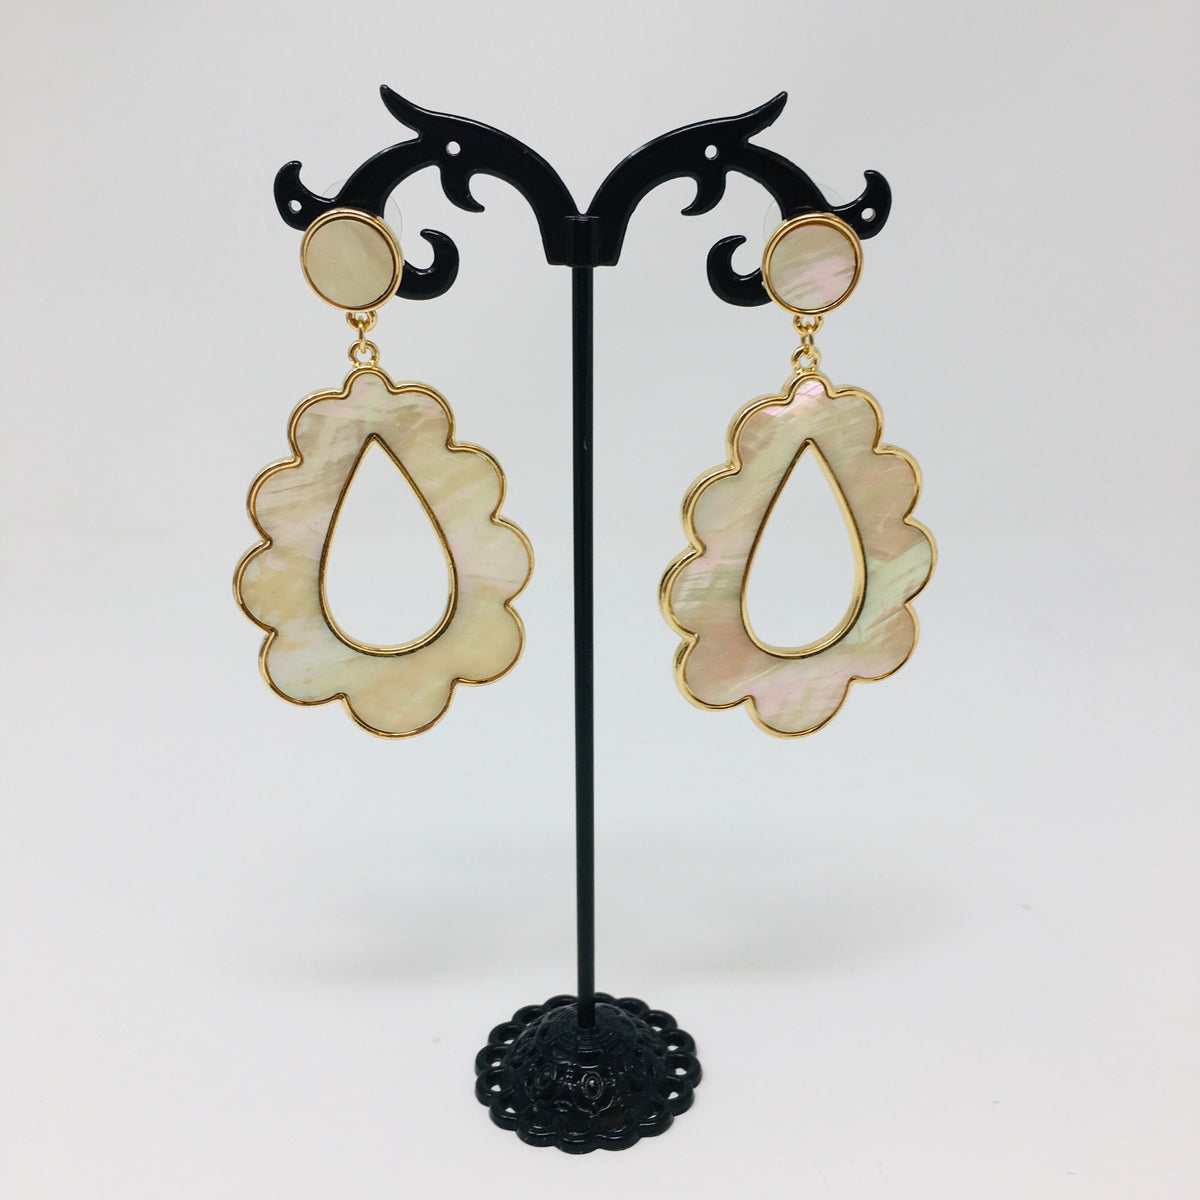 Scalloped teardrop shaped gold tone earrings with mother of pearl inserts shown hanging from a black earring stand on a white background